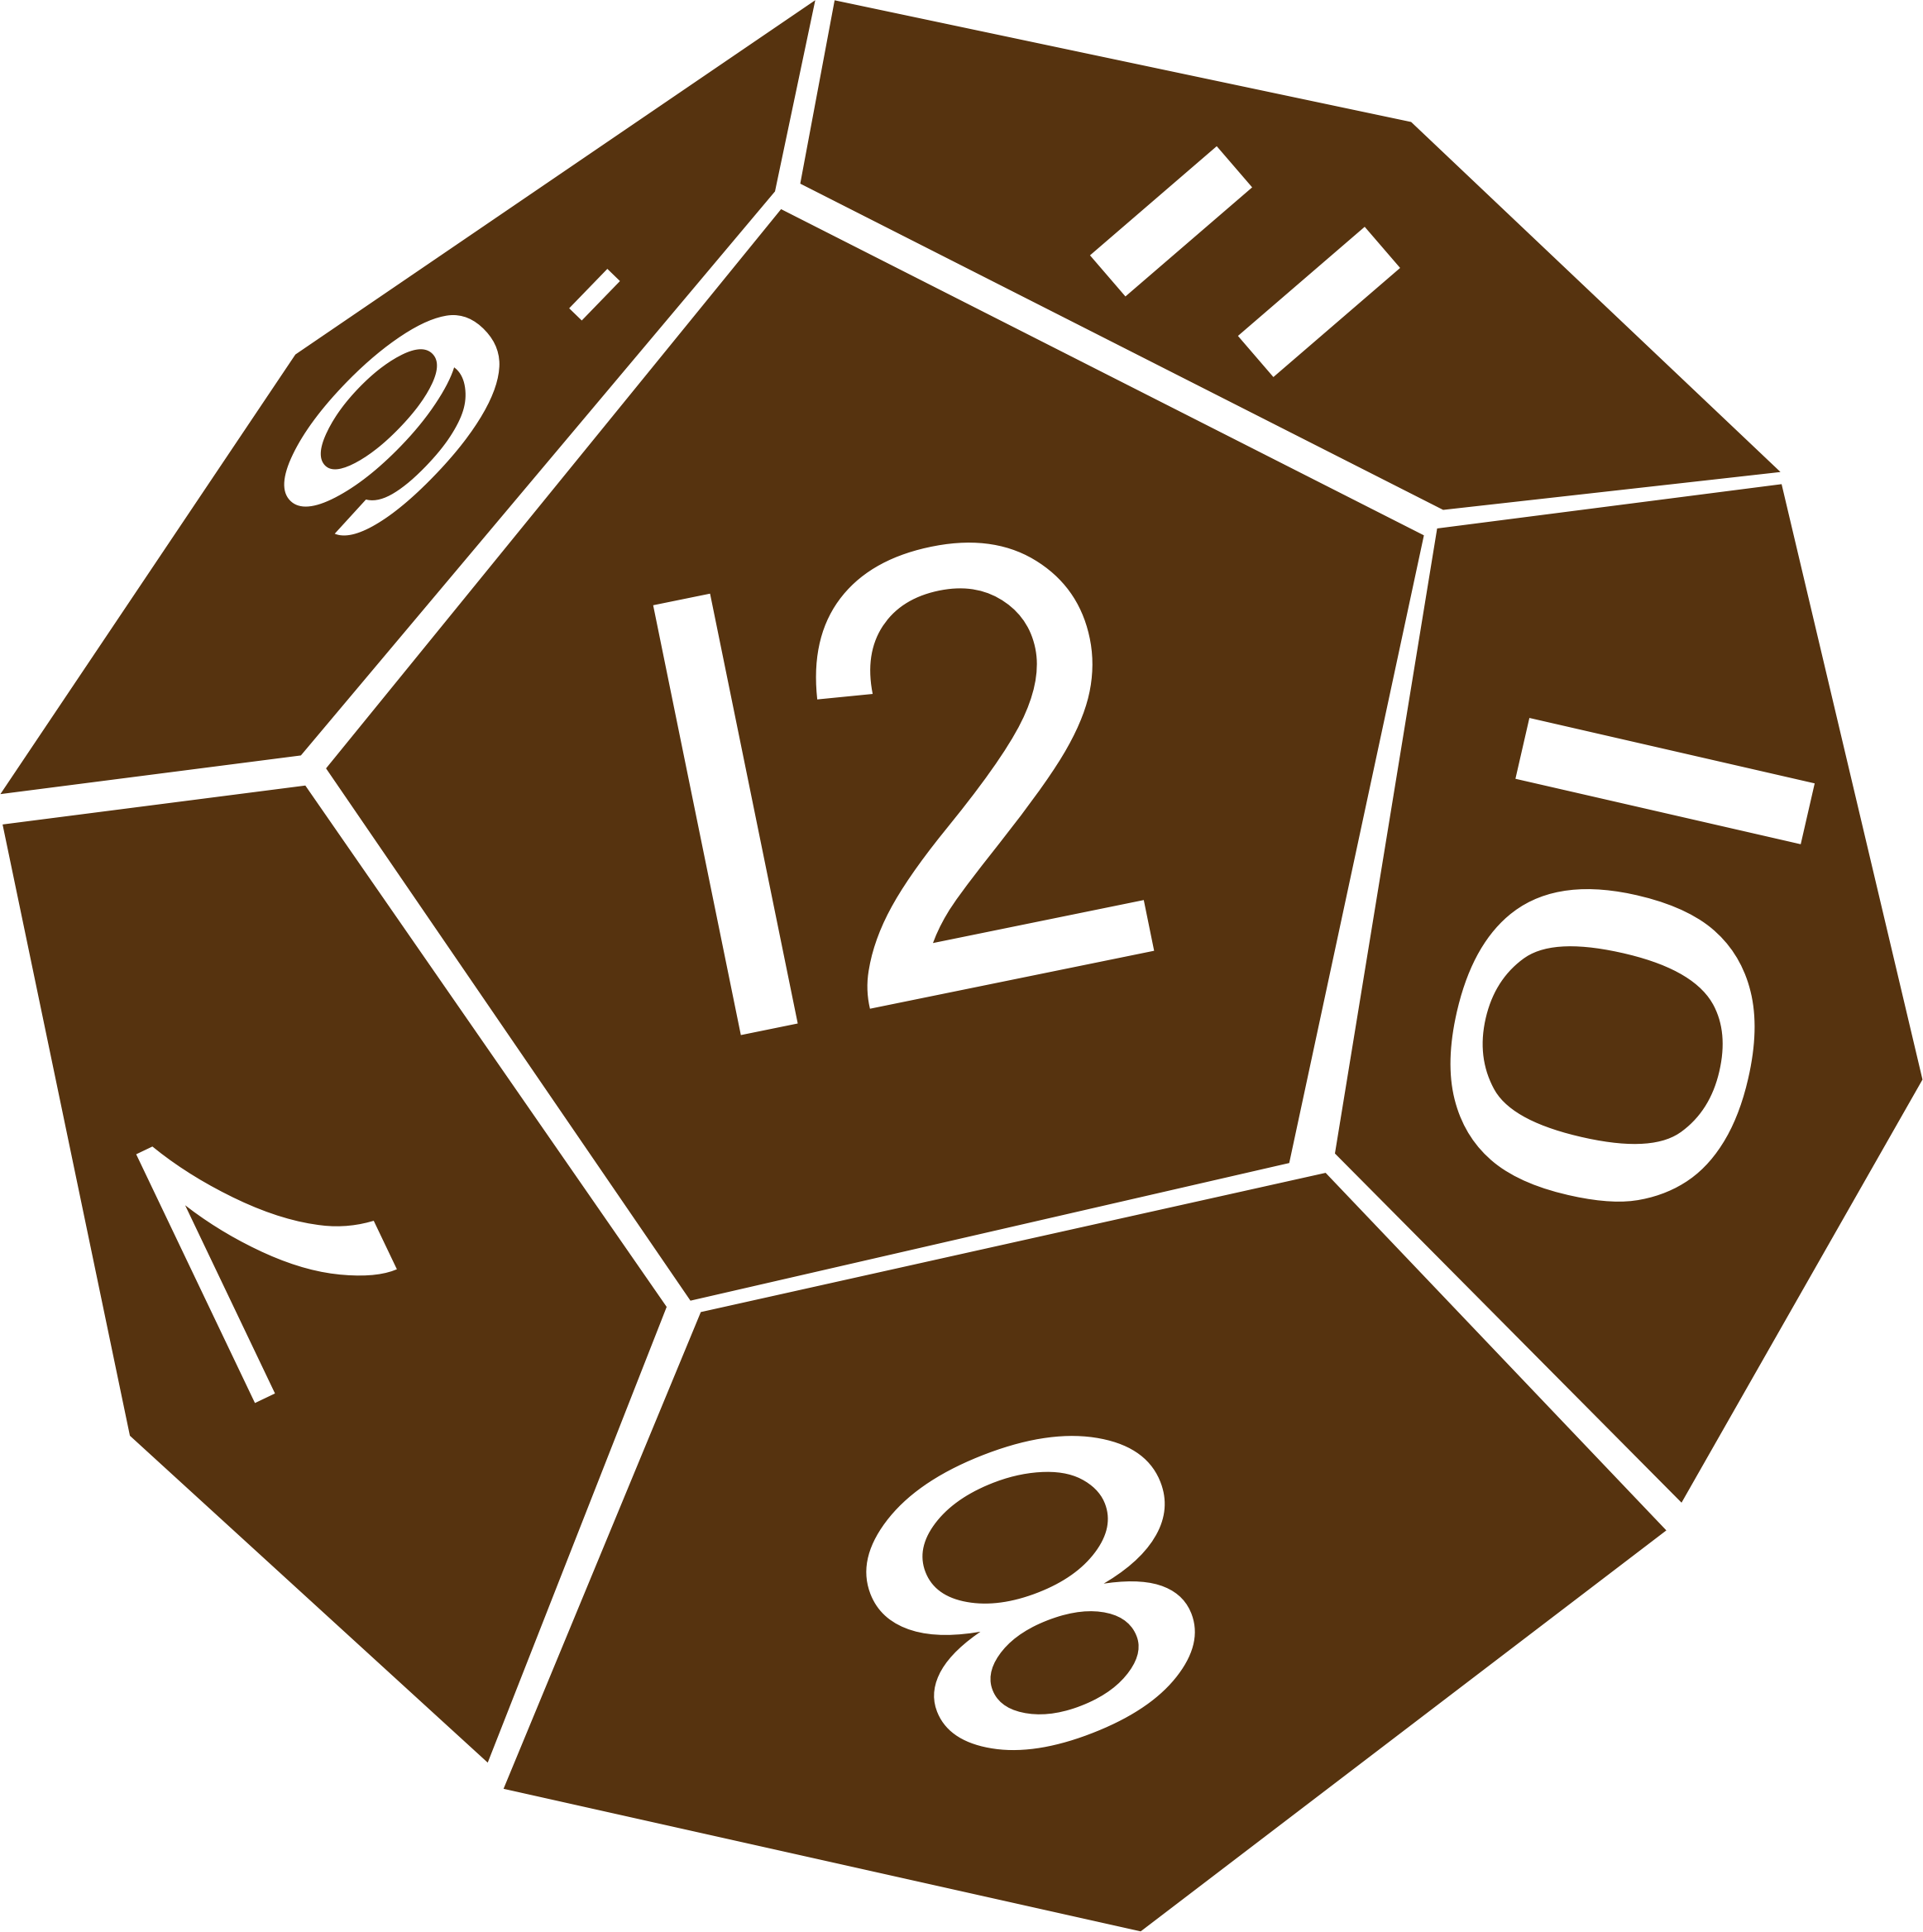 Son clipart twelve. D sided dice icons